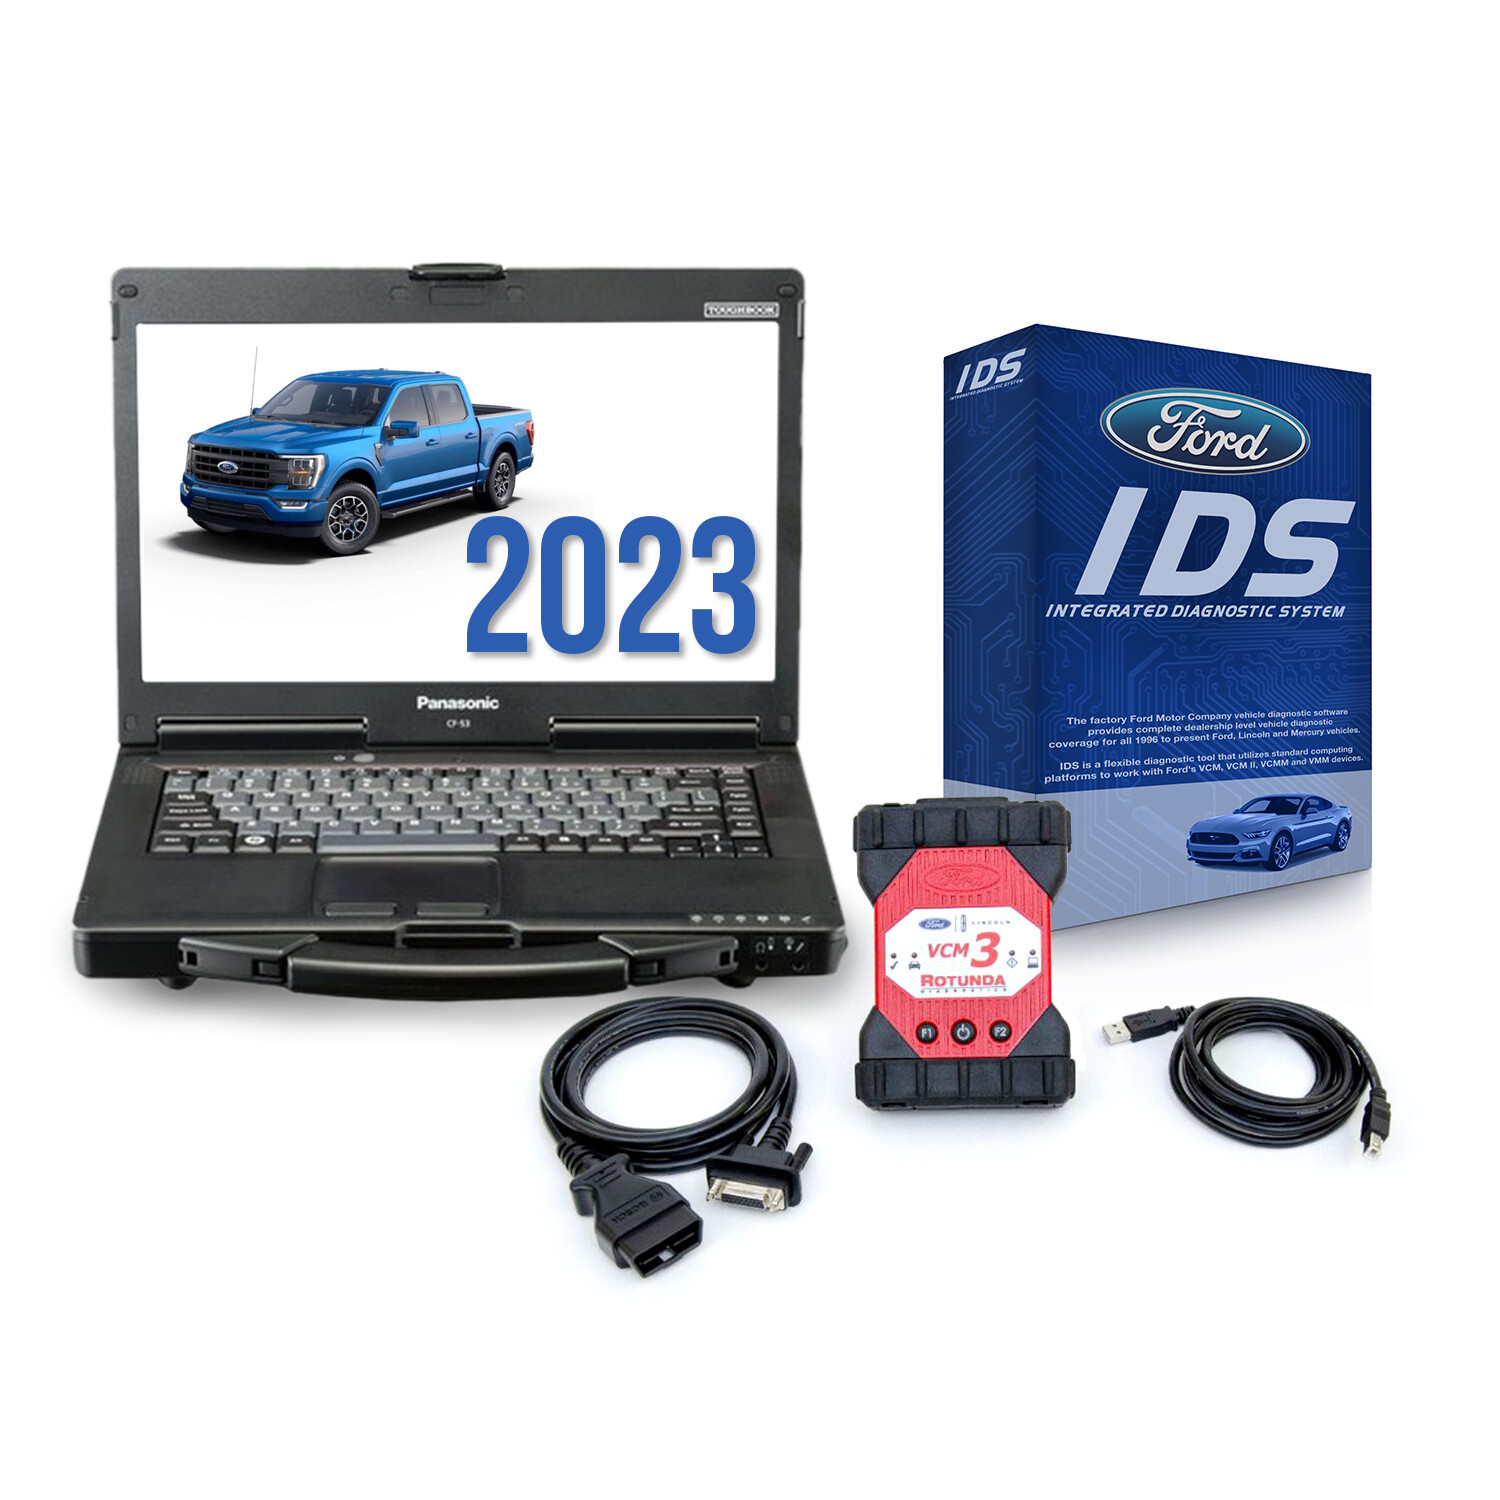 Ford IDS Software, VCM 3 Ford Tool with Toughbook Dealer Package